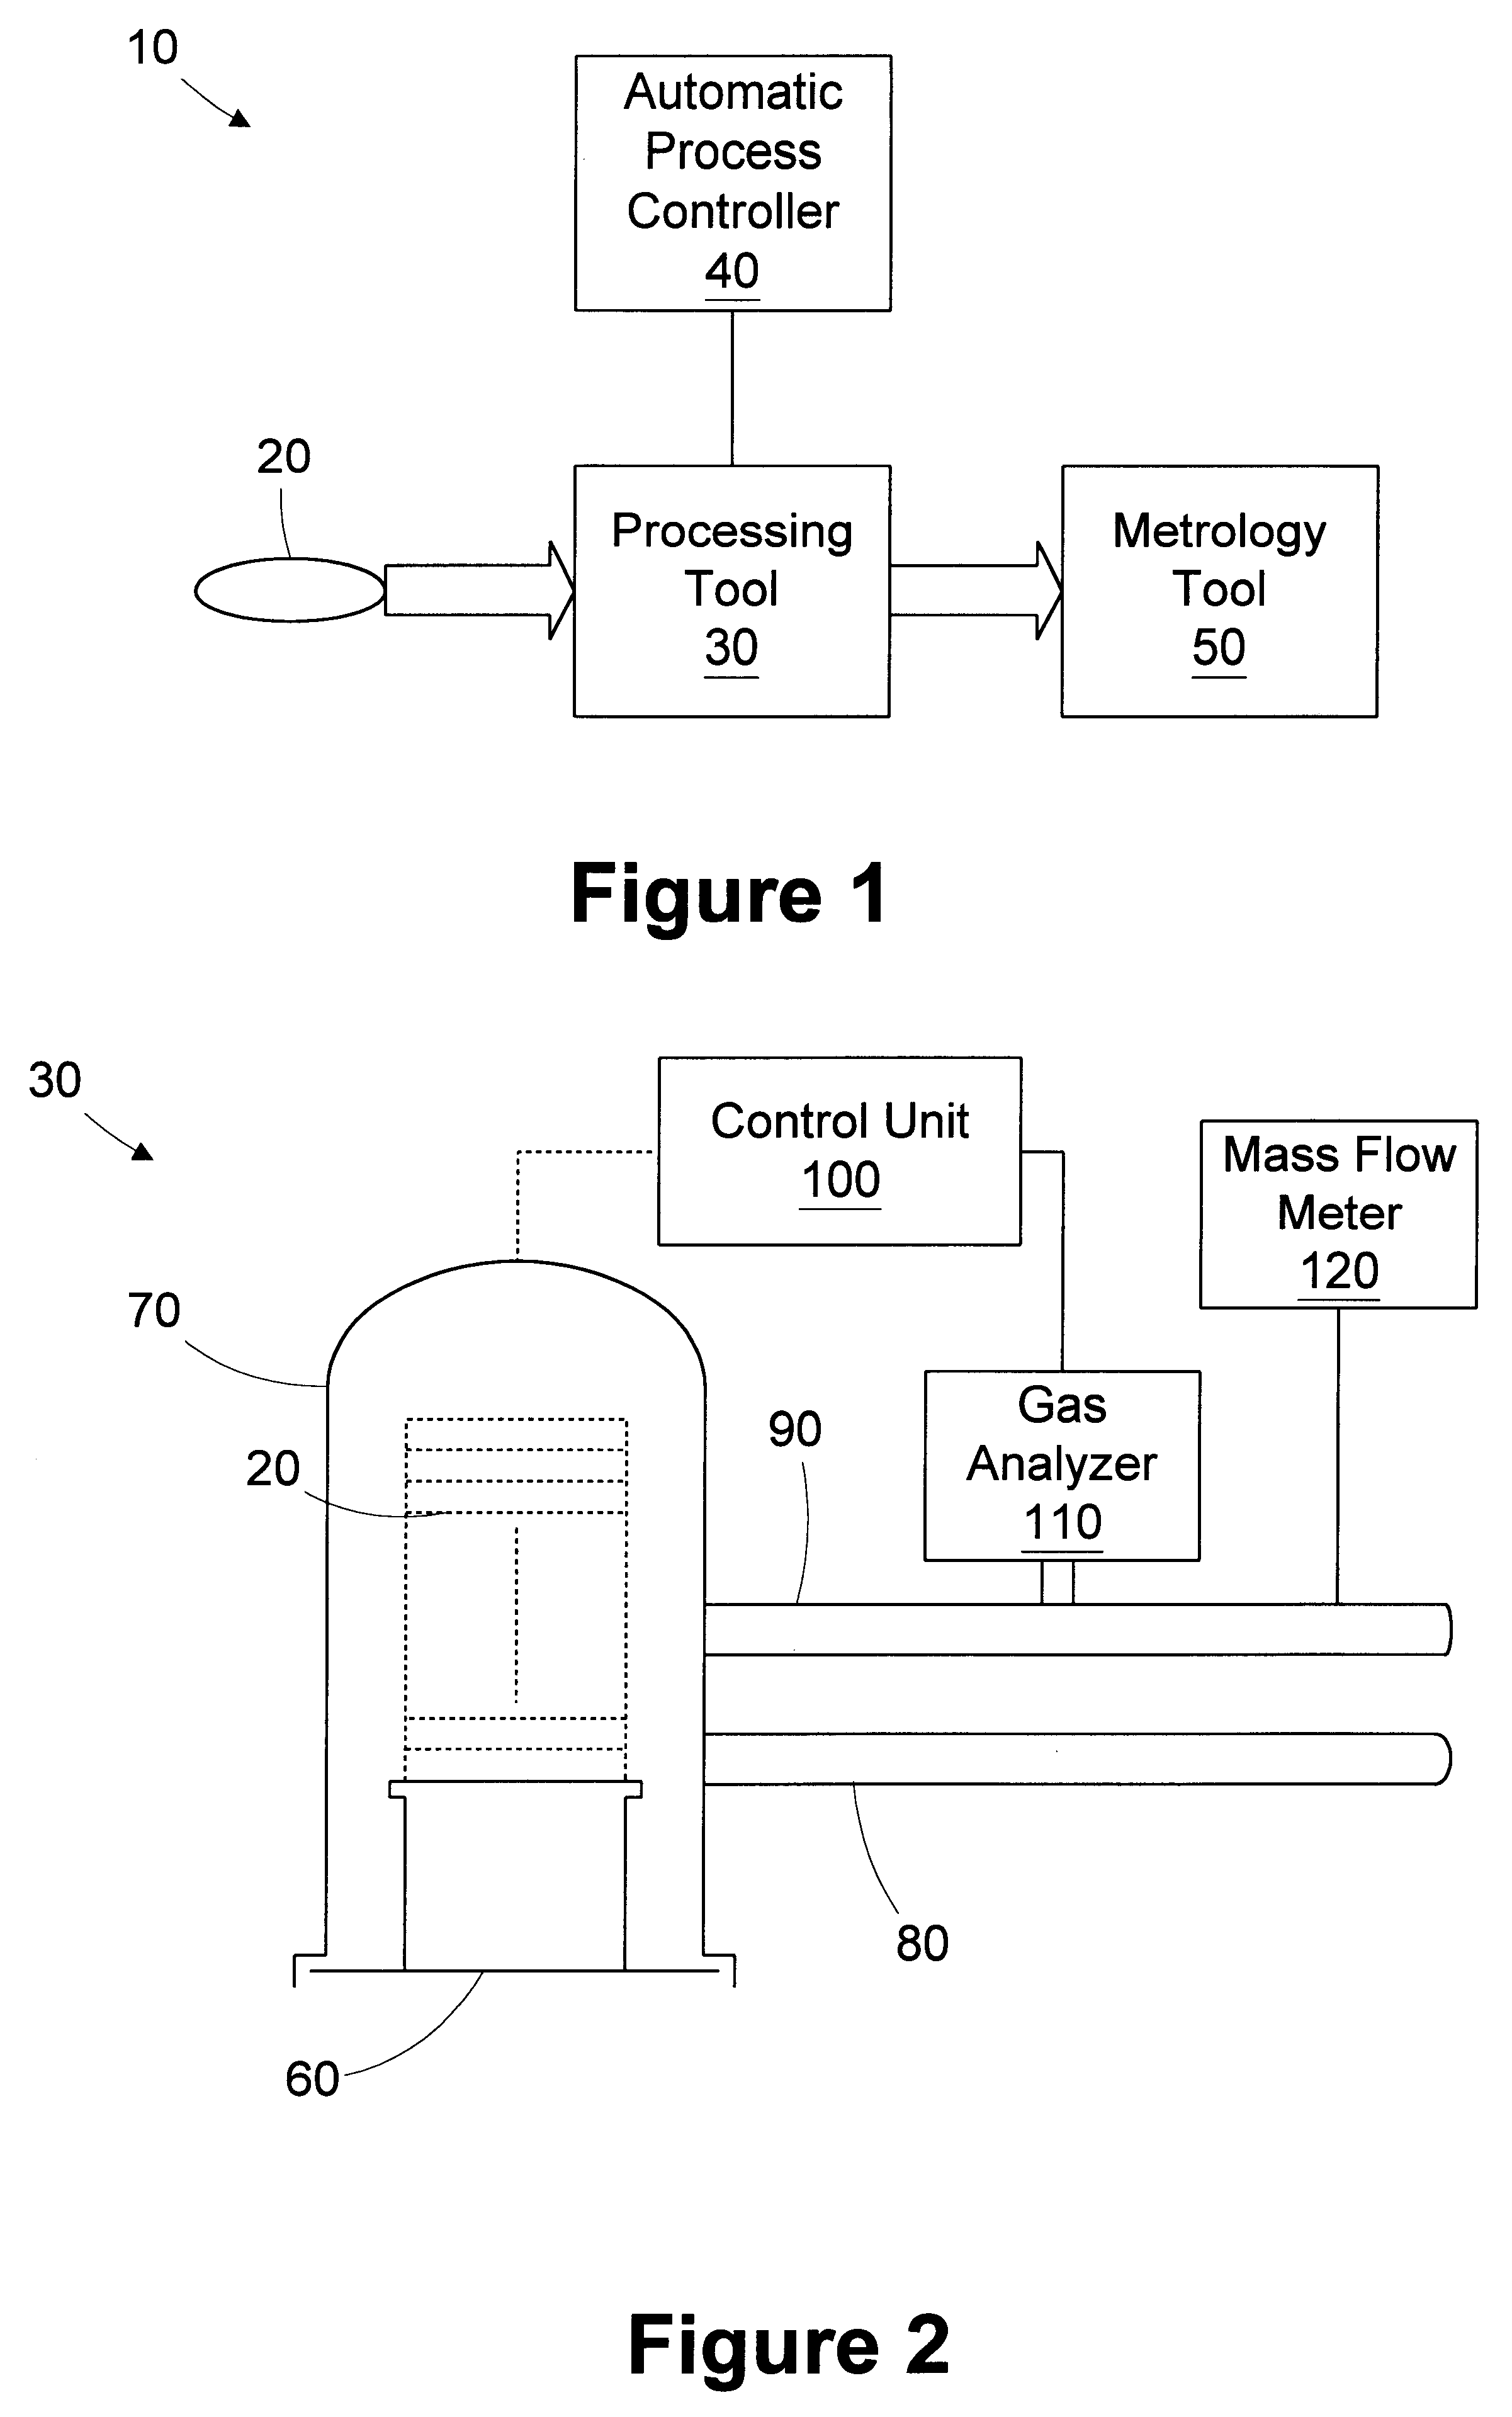 Method and apparatus for controlling deposition process using residual gas analysis